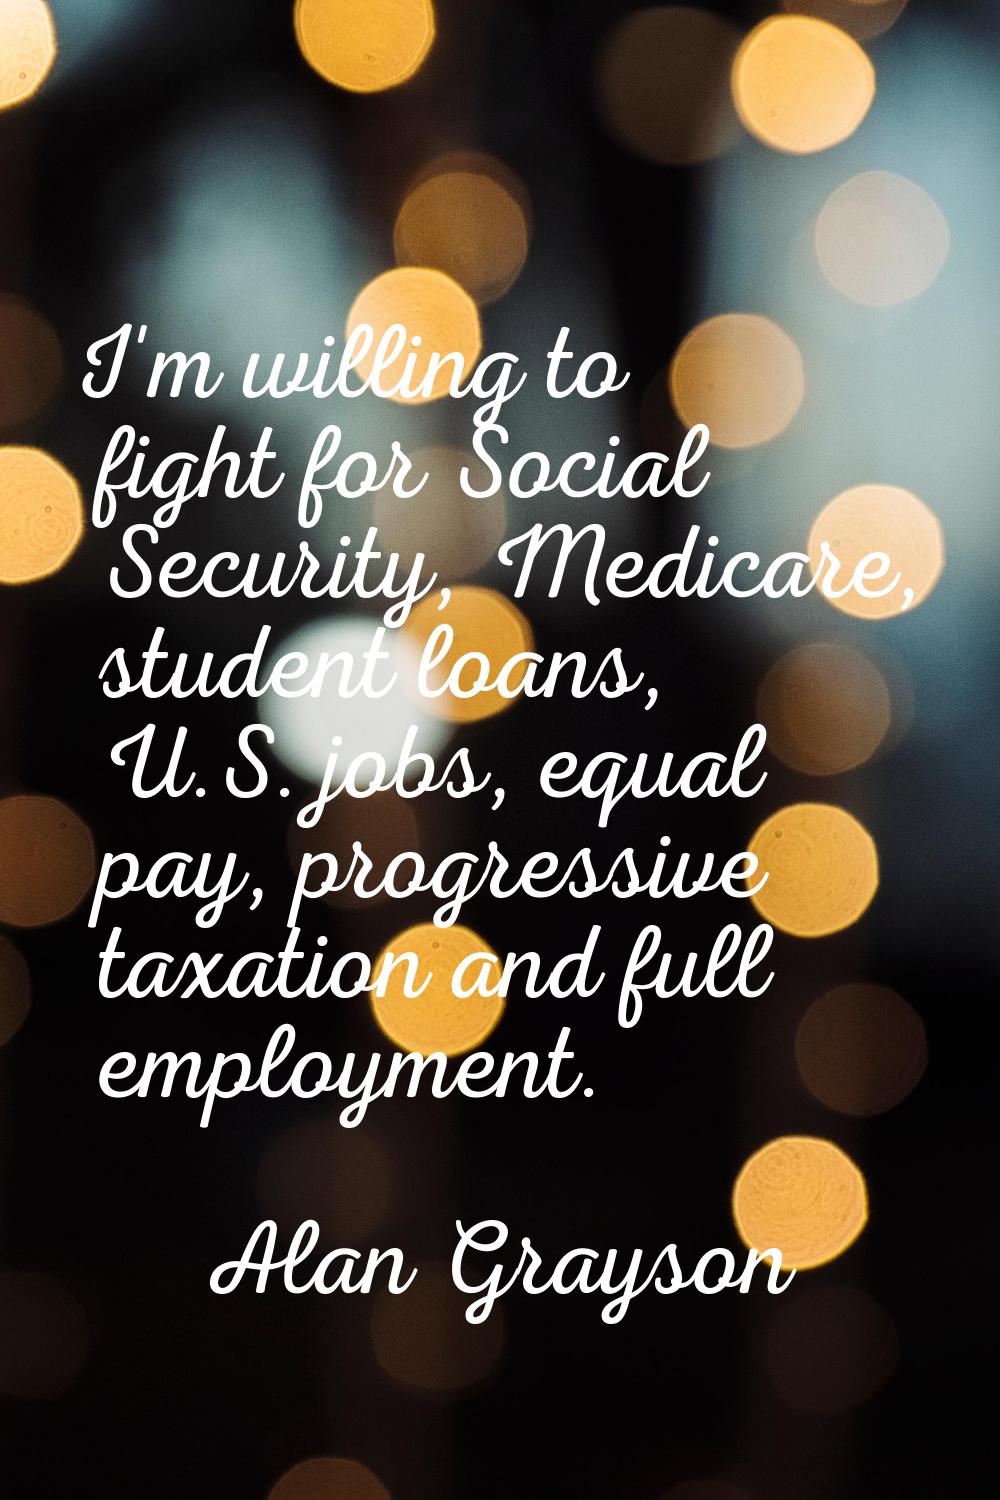 I'm willing to fight for Social Security, Medicare, student loans, U.S. jobs, equal pay, progressiv